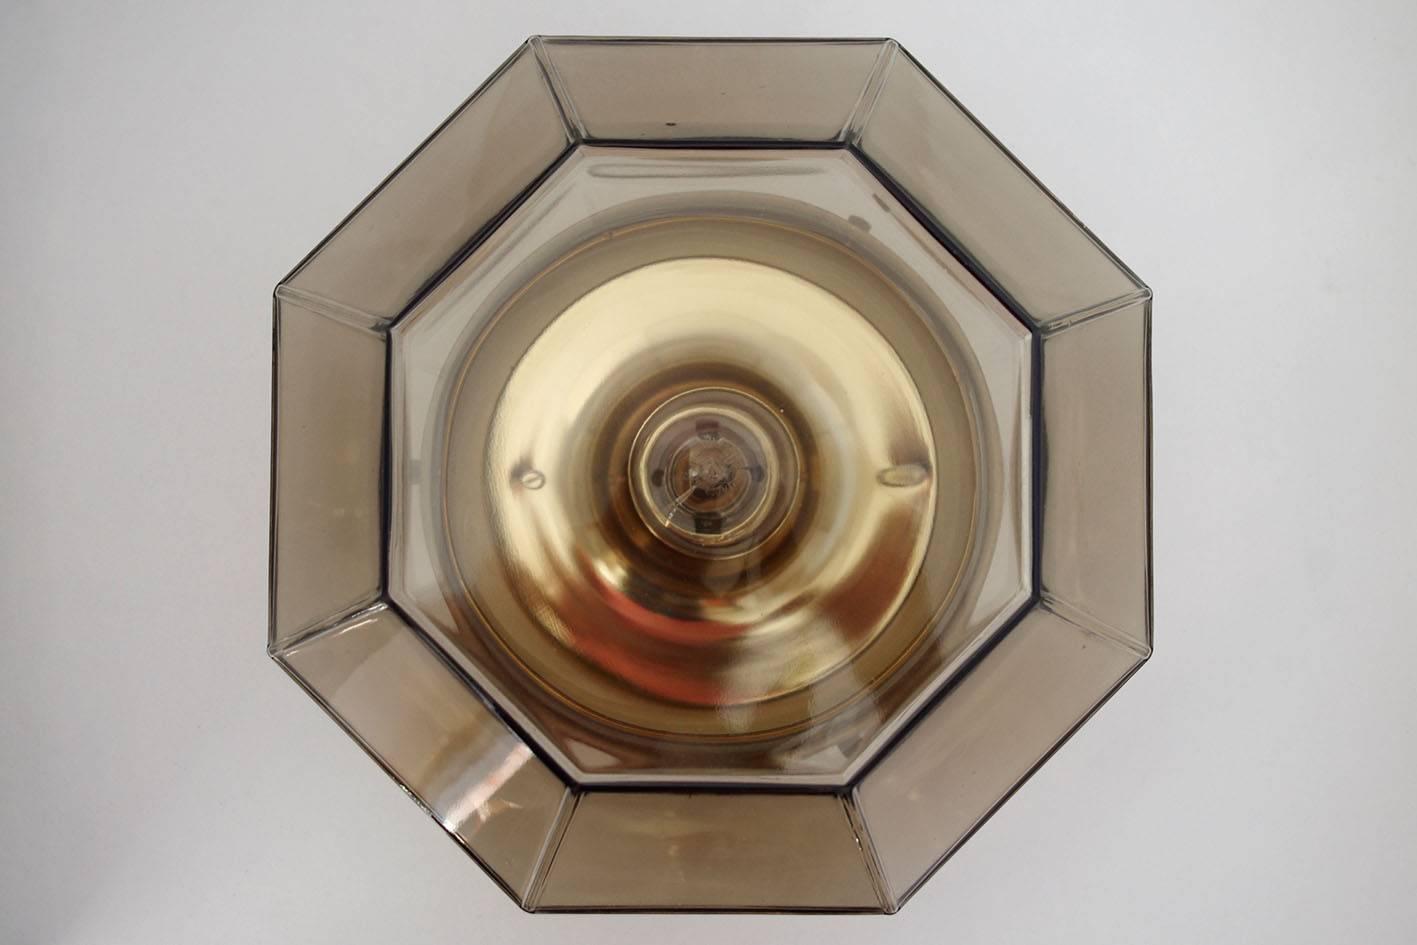 Pair of large geometric glass and brass ceiling or wall flush mounts.
Germany, 1960s
Lamp sockets: 1x E27 (US E26)